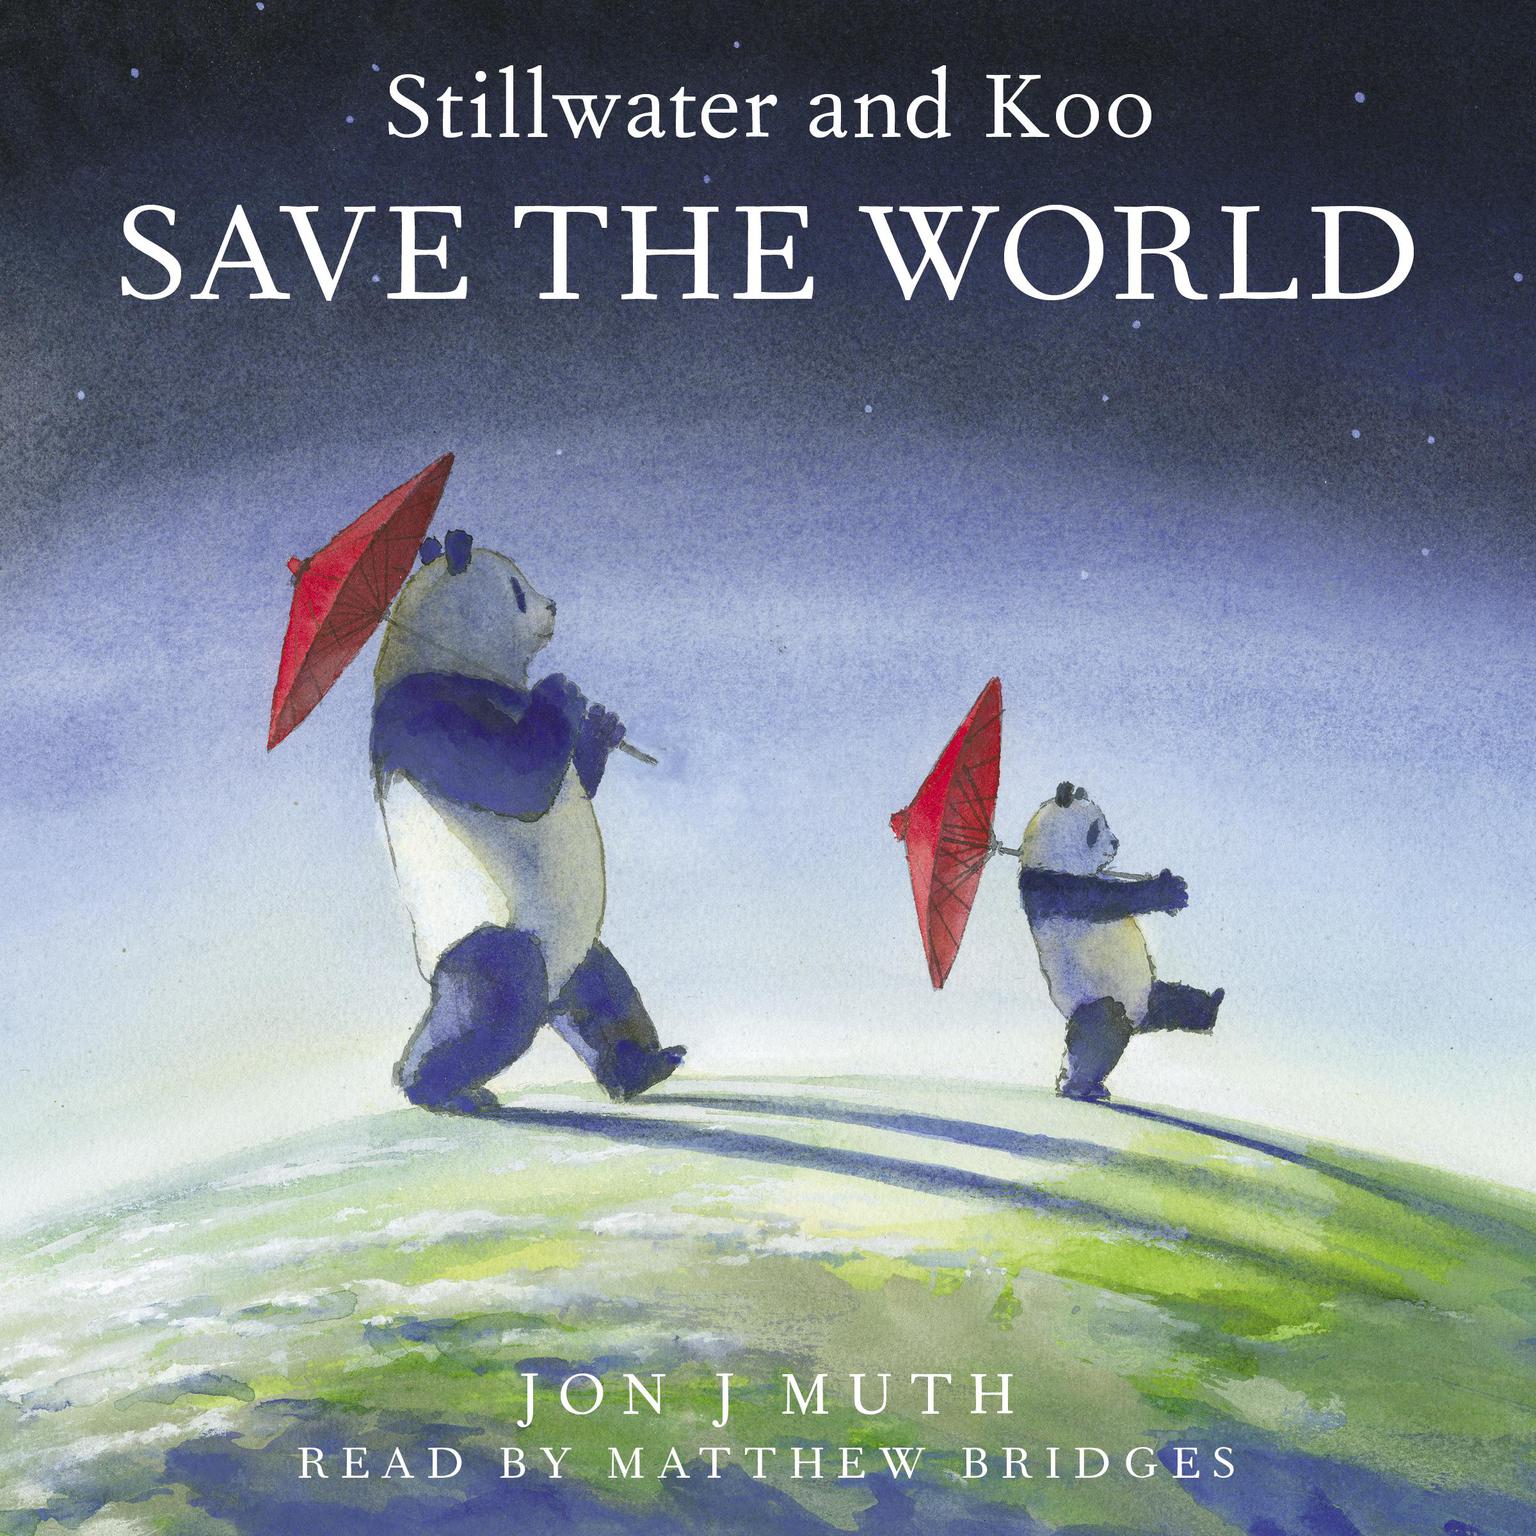 Stillwater and Koo Save the World (A Stillwater and Friends Book) Audiobook, by Jon J. Muth